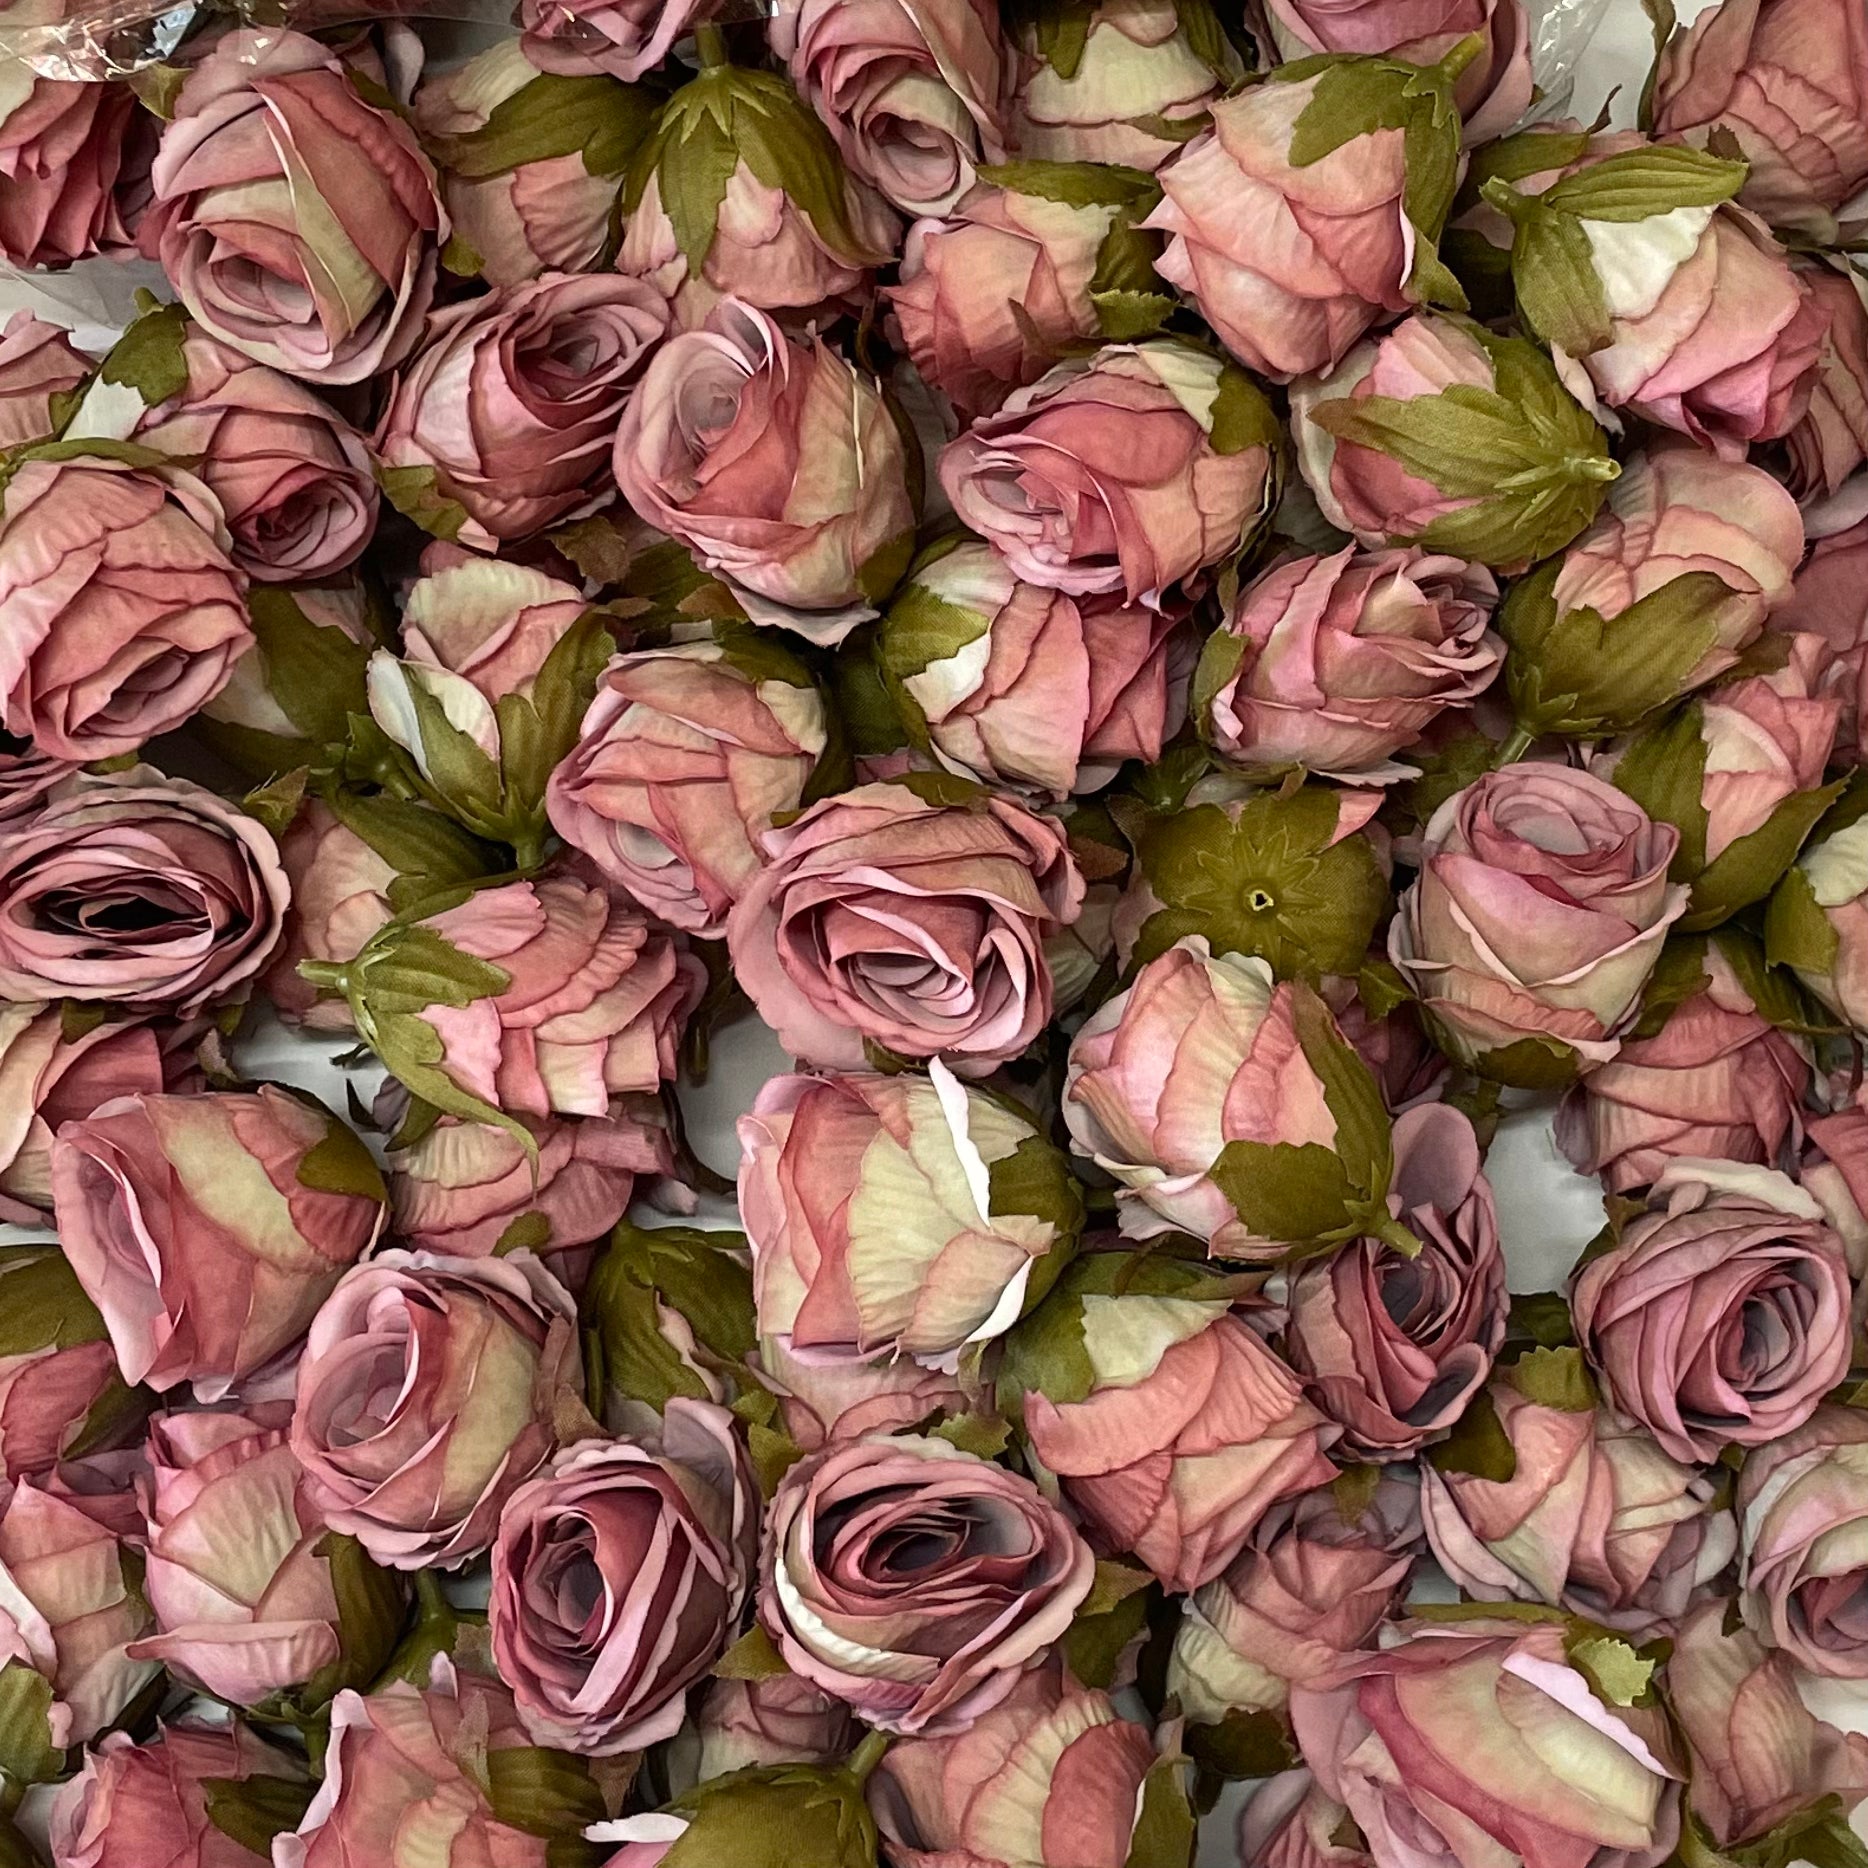 Artificial Silk Flower Heads - Vintage Mauve Rose Bud Style 106 - 5 Pack